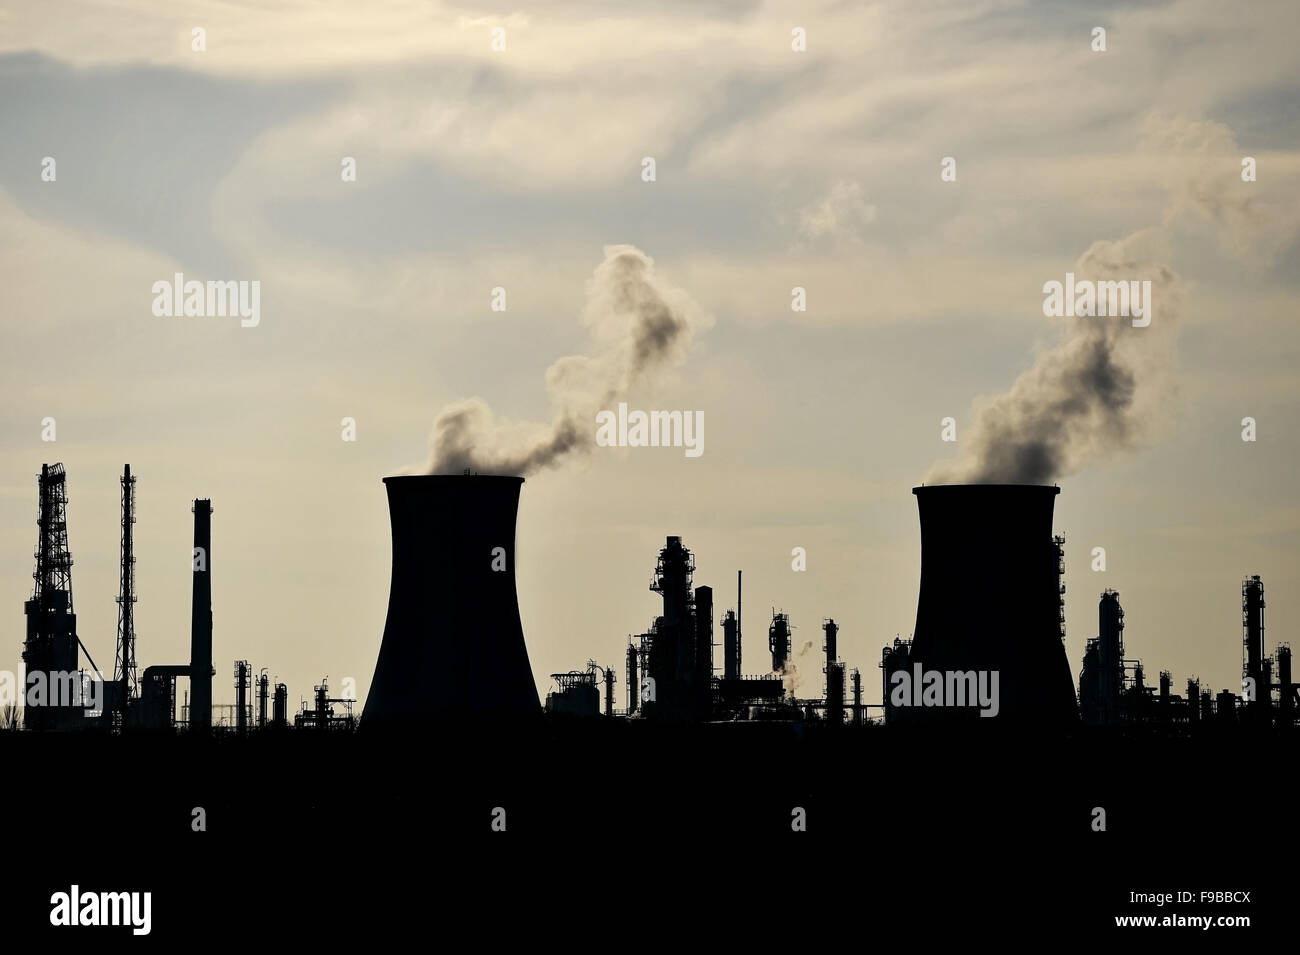 Smoke and steam coming out from industrial petrochemical plant chimneys silhouetted against the sky Stock Photo